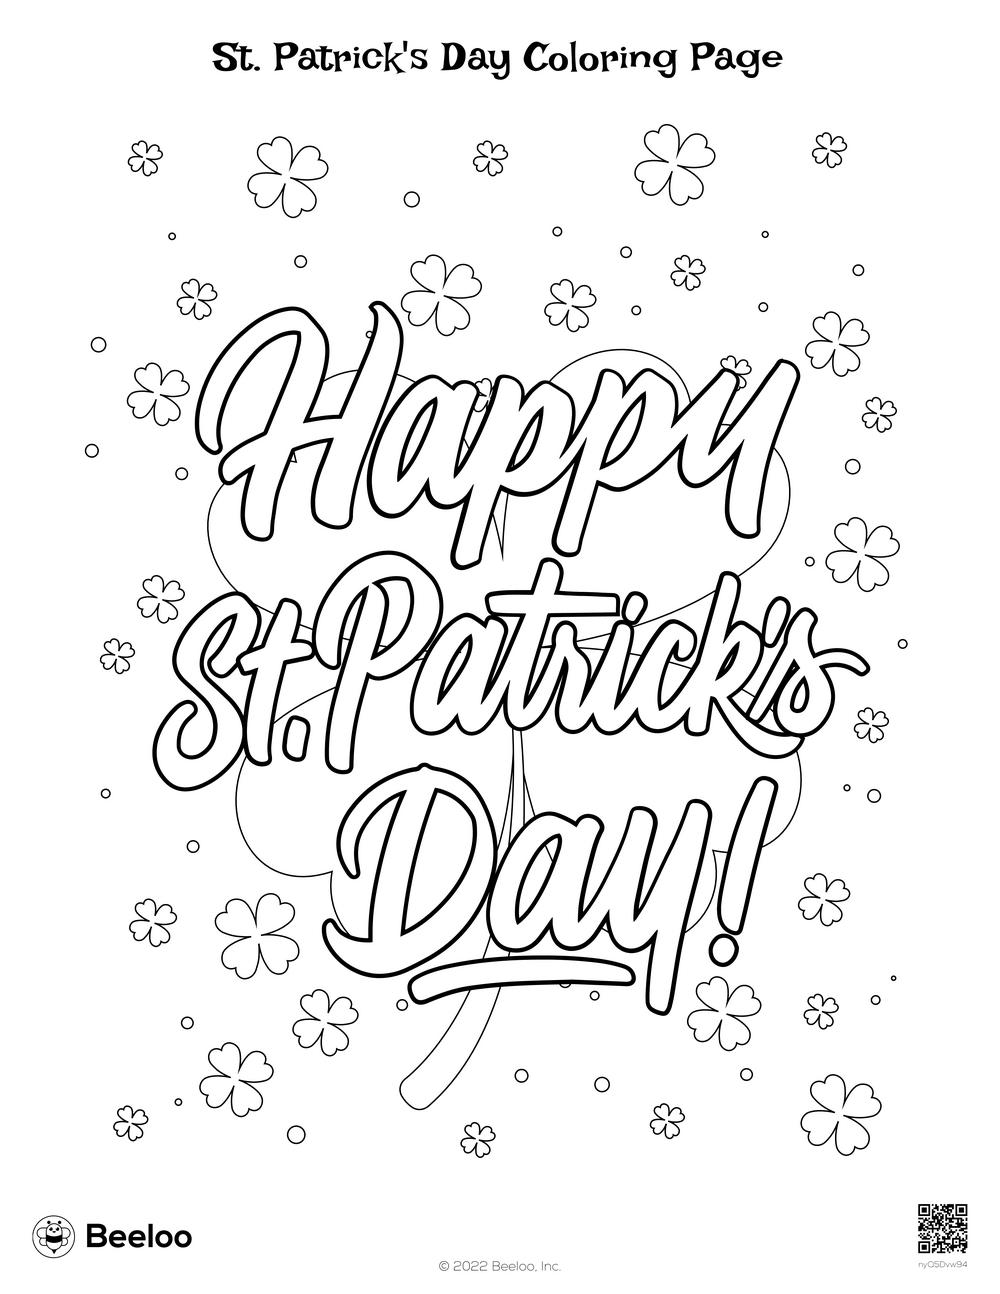 St patricks day coloring page â printable crafts and activities for kids